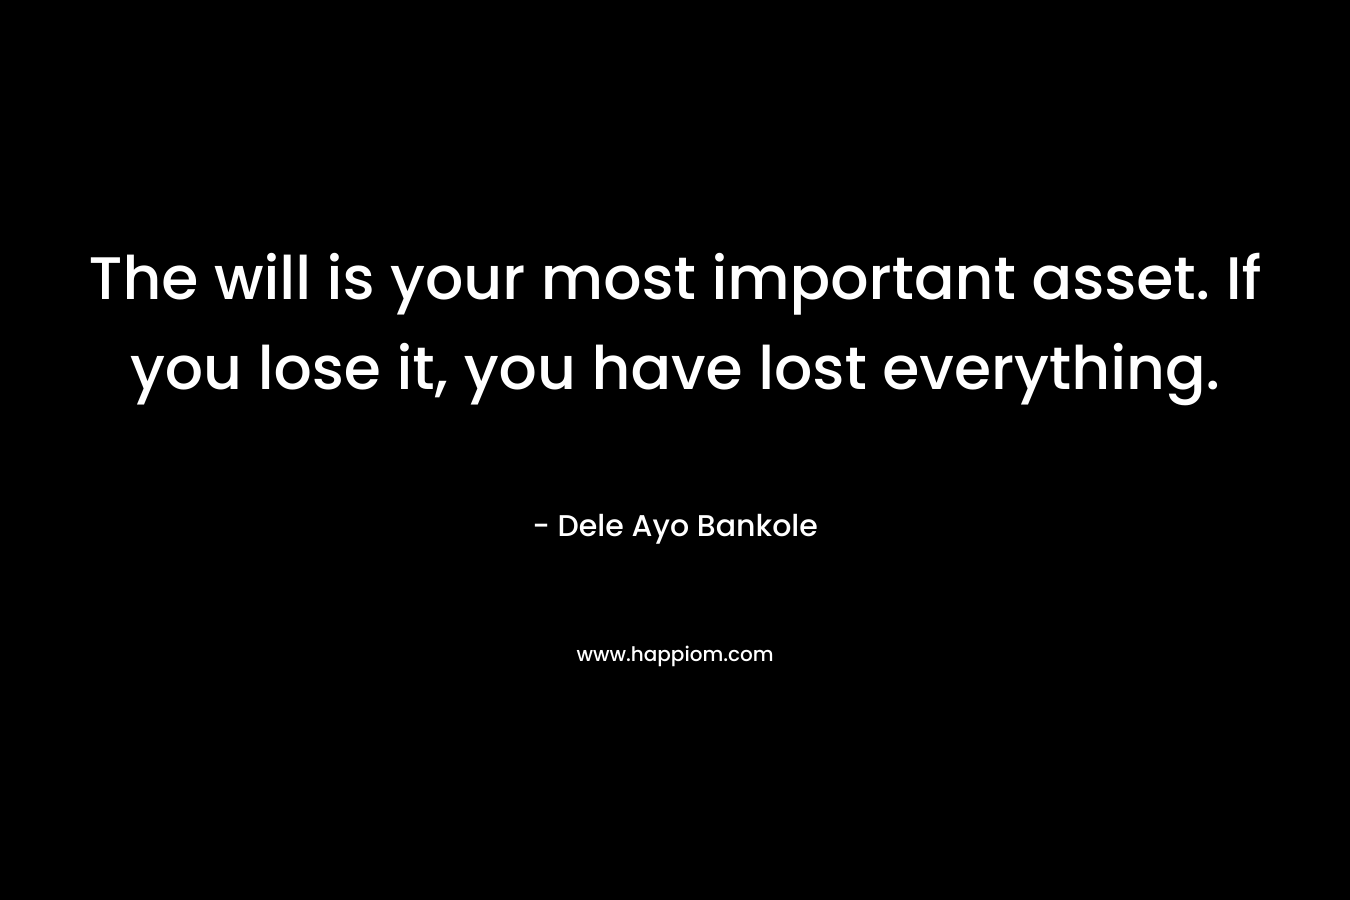 The will is your most important asset. If you lose it, you have lost everything. – Dele Ayo Bankole